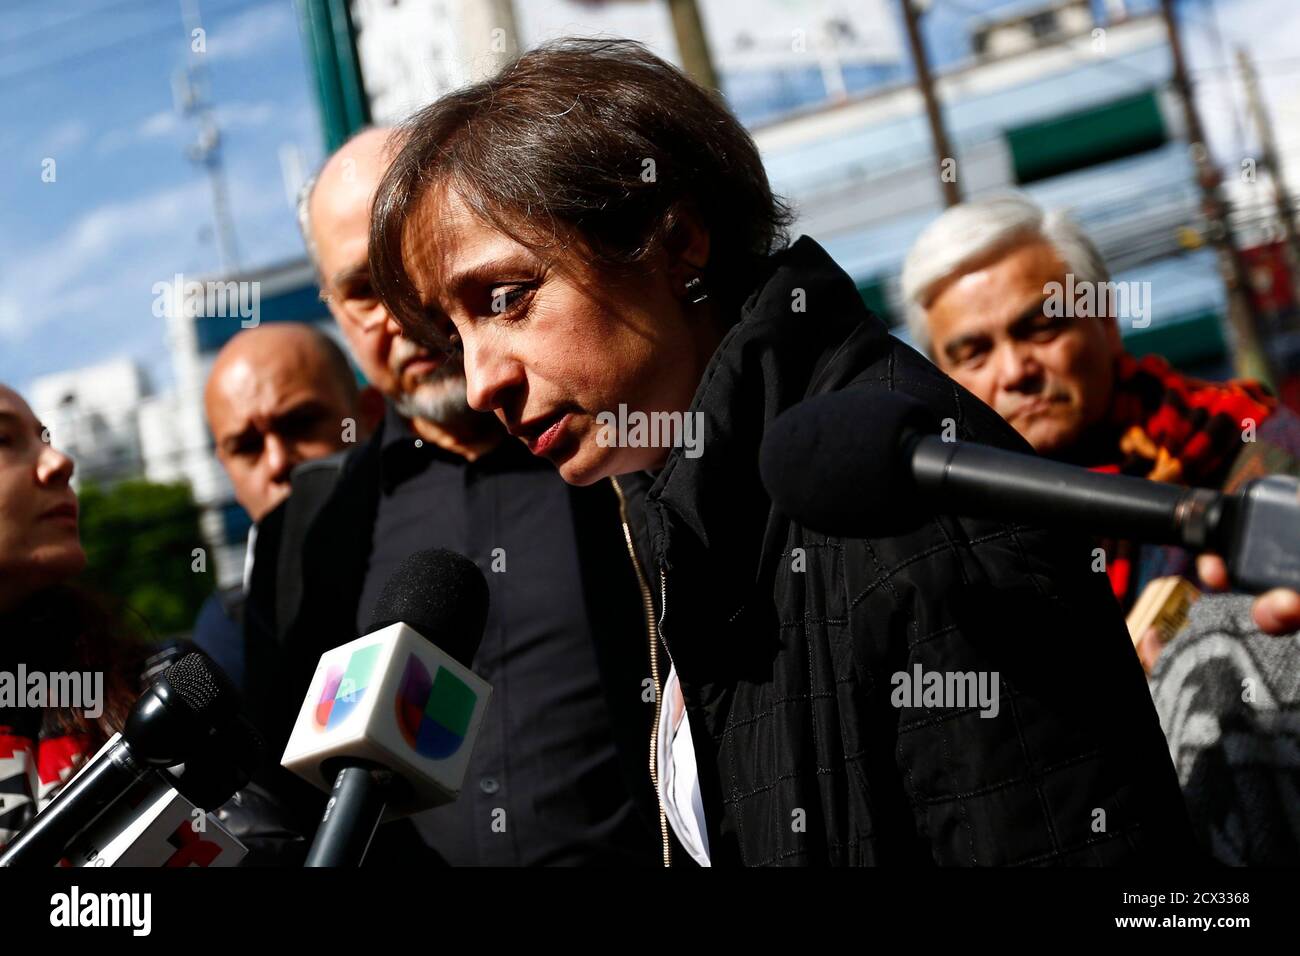 Mexican journalist Carmen Aristegui speaks with journalists outside MVS  radio station in Mexico City March 16, 2015. Aristegui, whose team revealed  a conflict-of-interest scandal ensnaring President Enrique Pena Nieto last  year, has